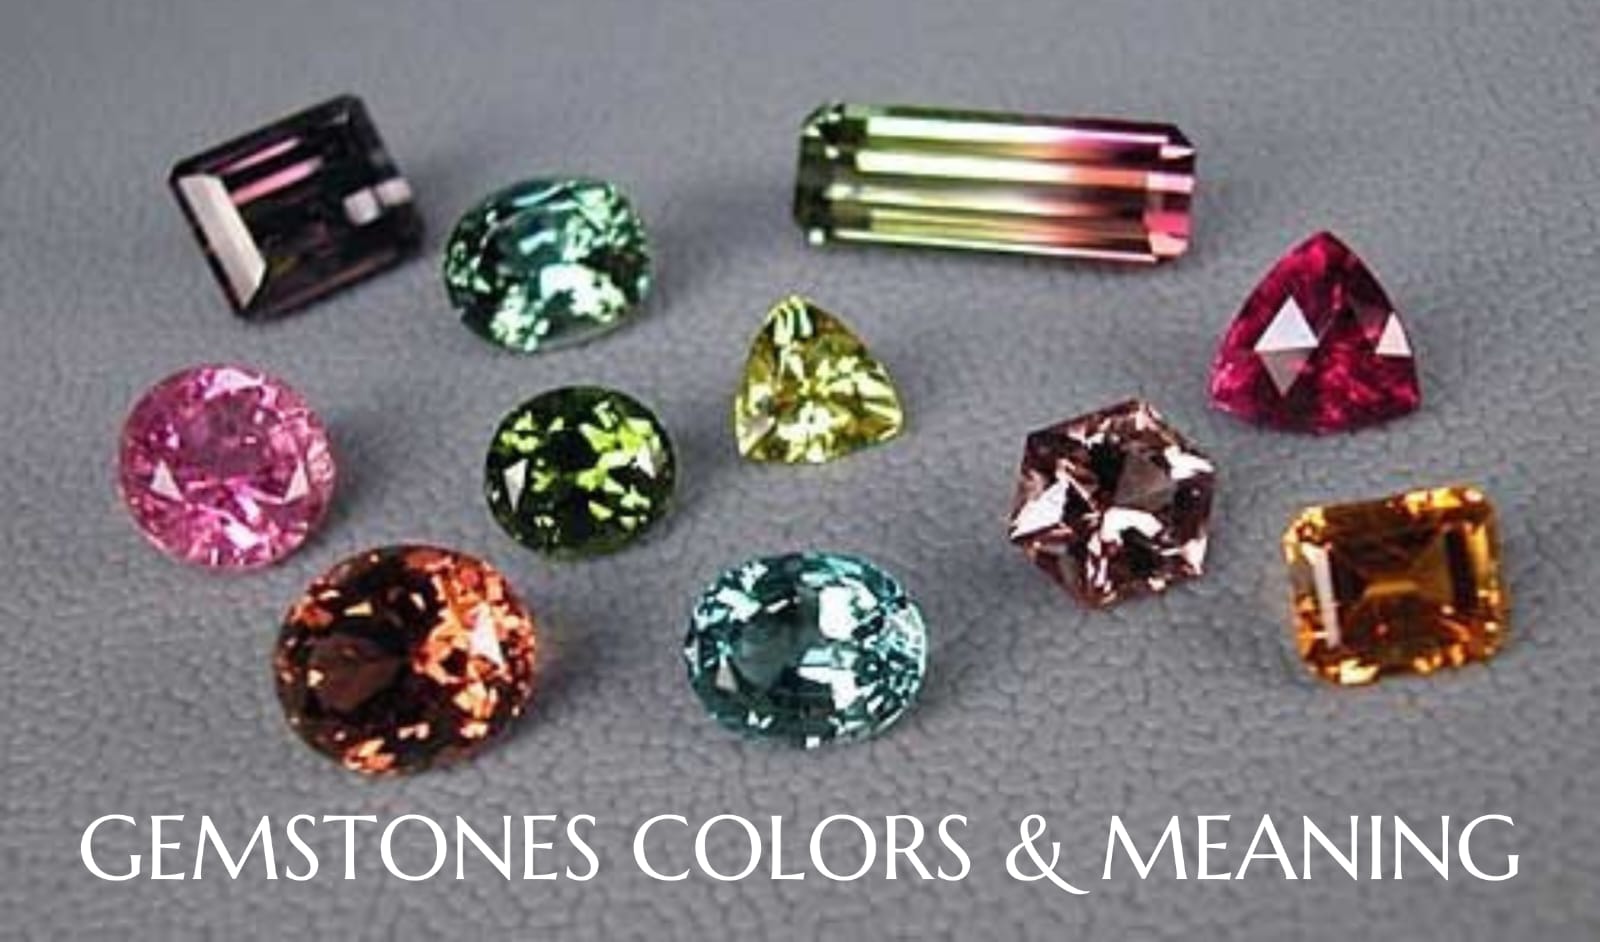 Gemstones colors & Meaning